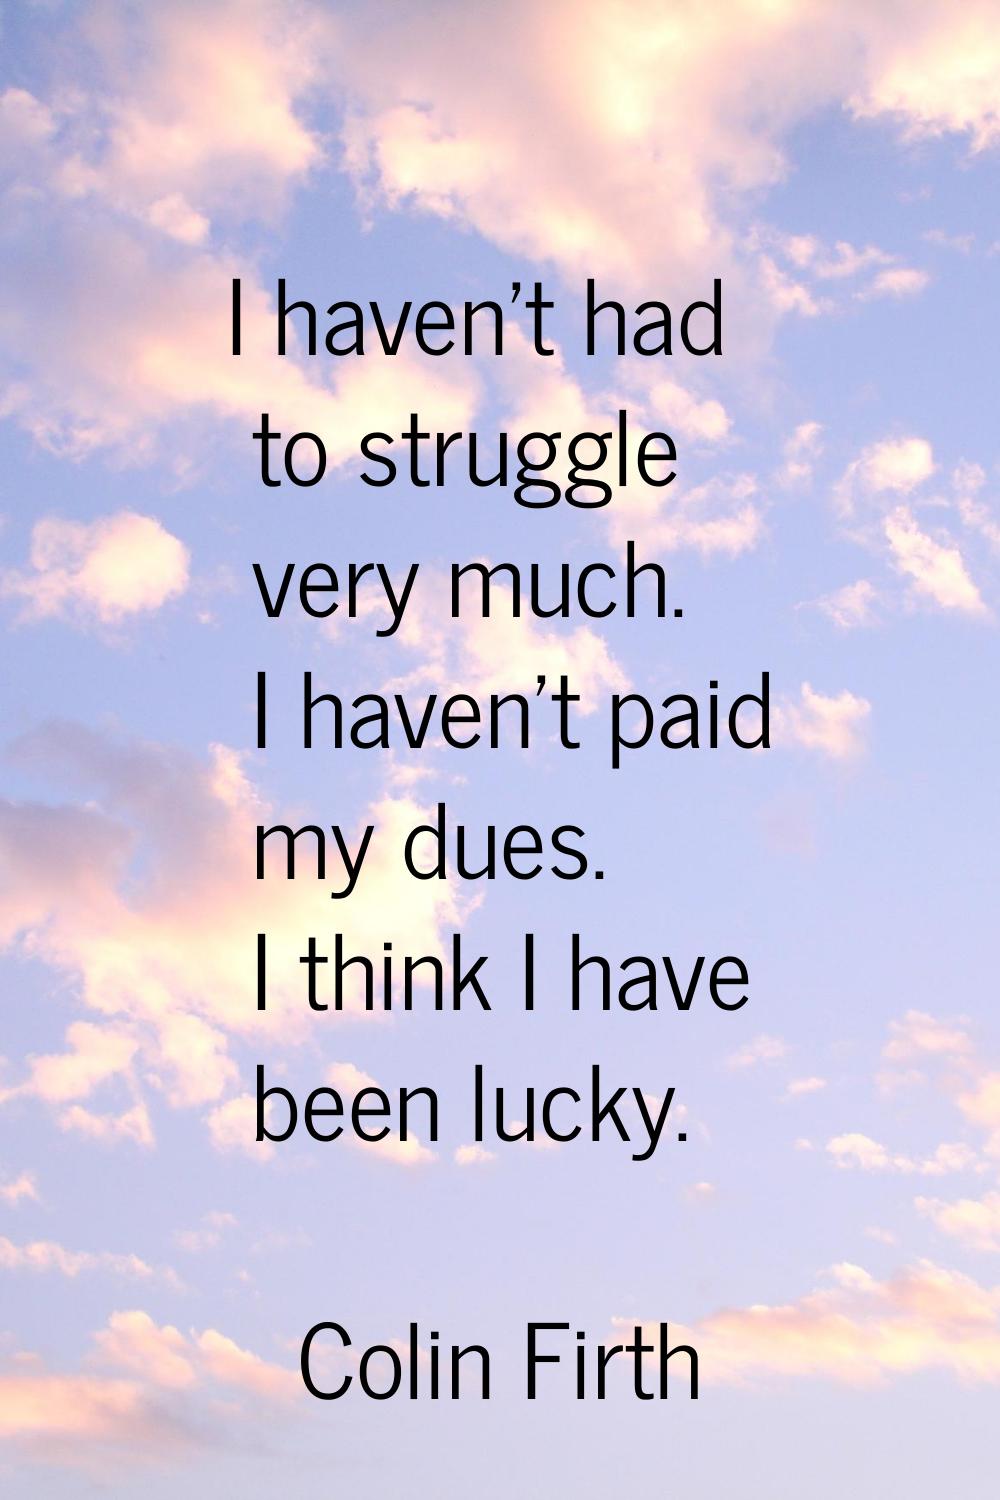 I haven't had to struggle very much. I haven't paid my dues. I think I have been lucky.